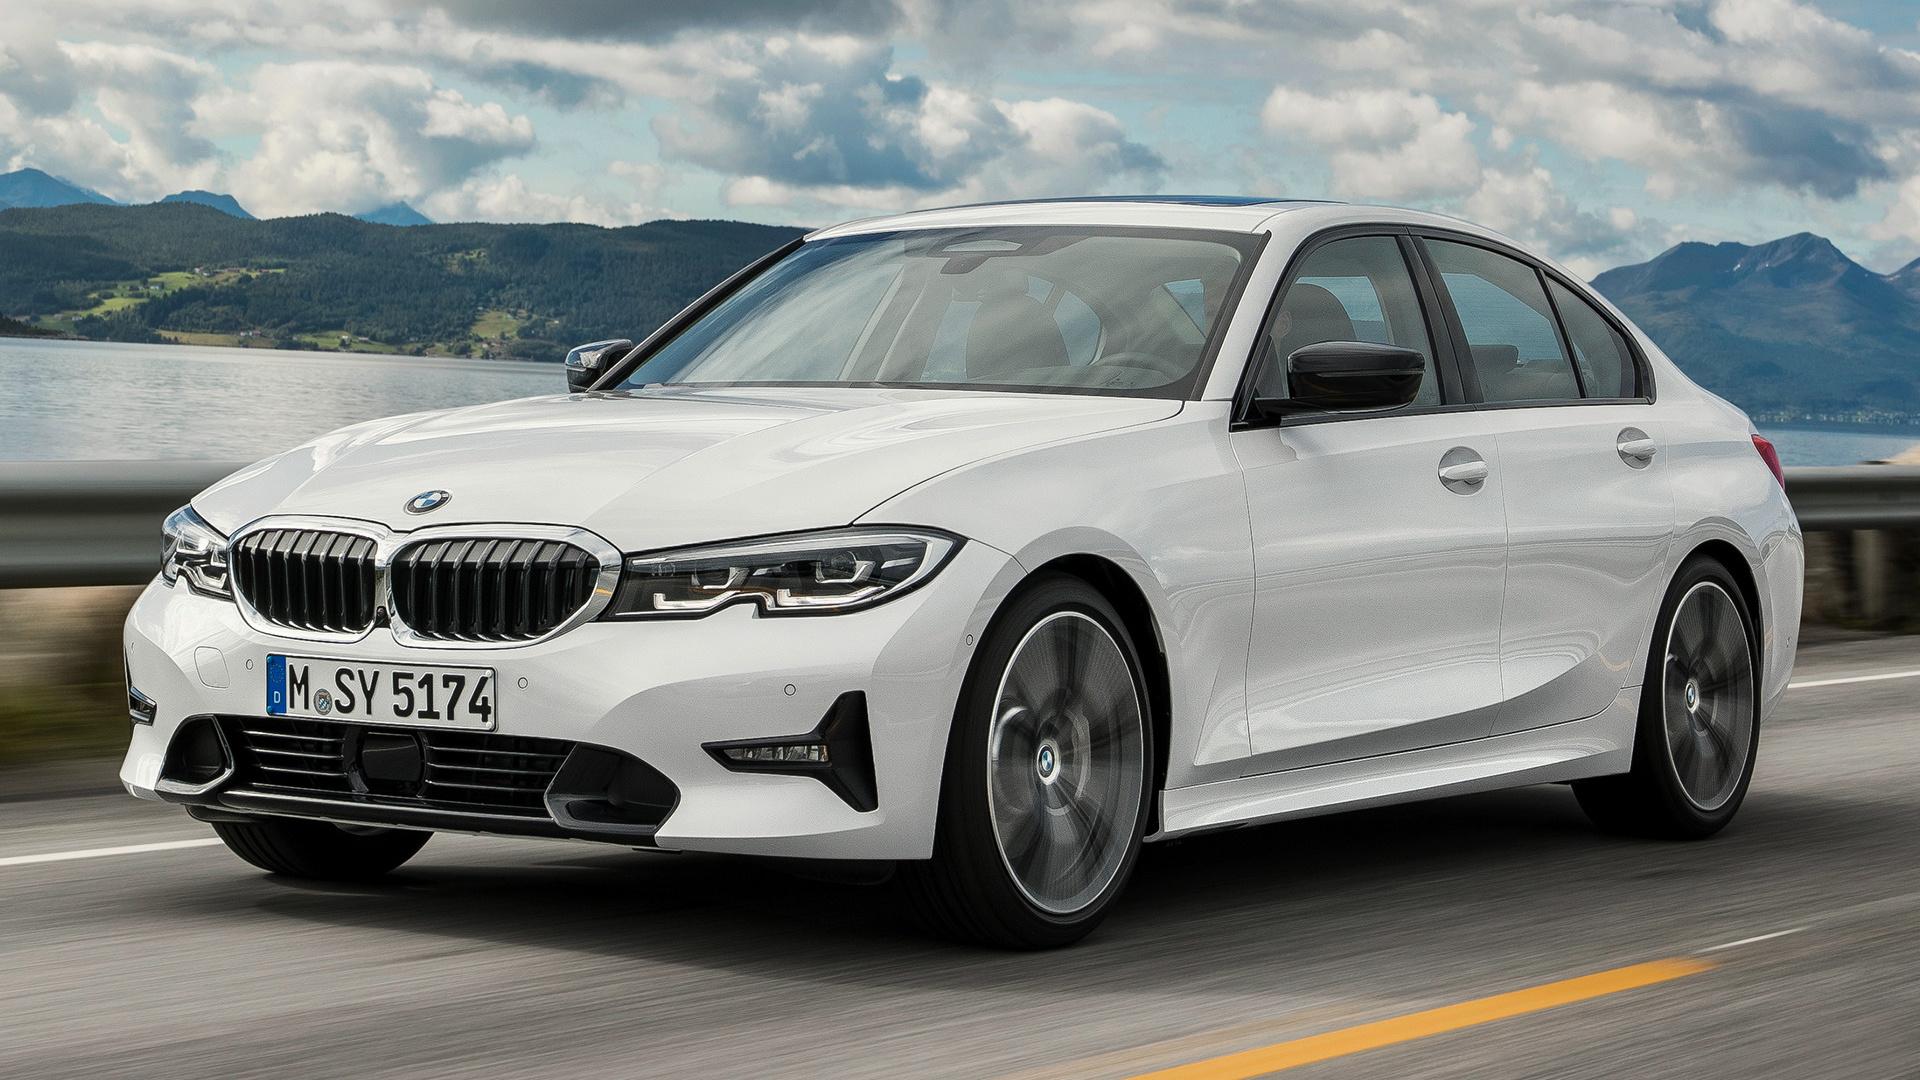 BMW 3 Series and HD Image